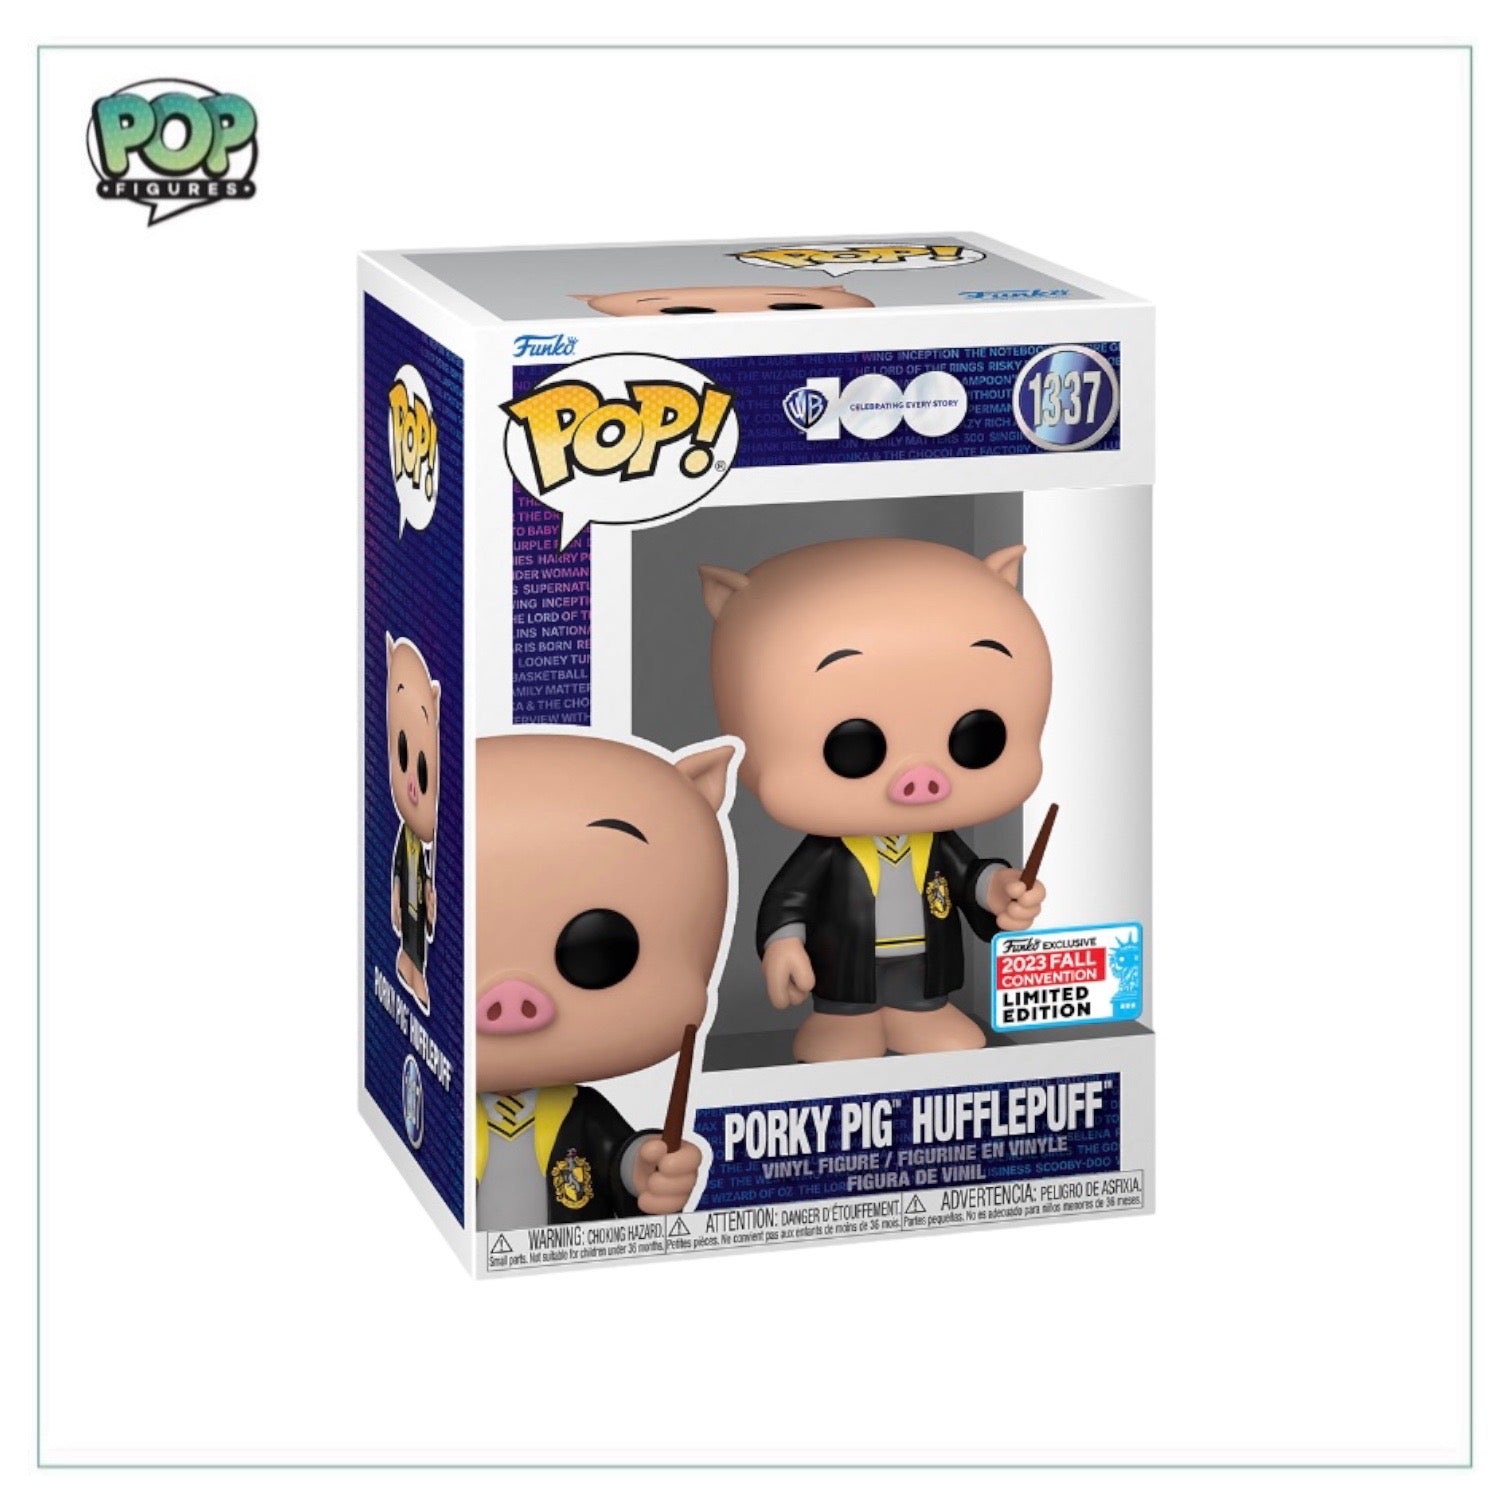 Porky Pig Hufflepuff #1337 Funko Pop! - WB 100 - NYCC 2023 Shared Exclusive